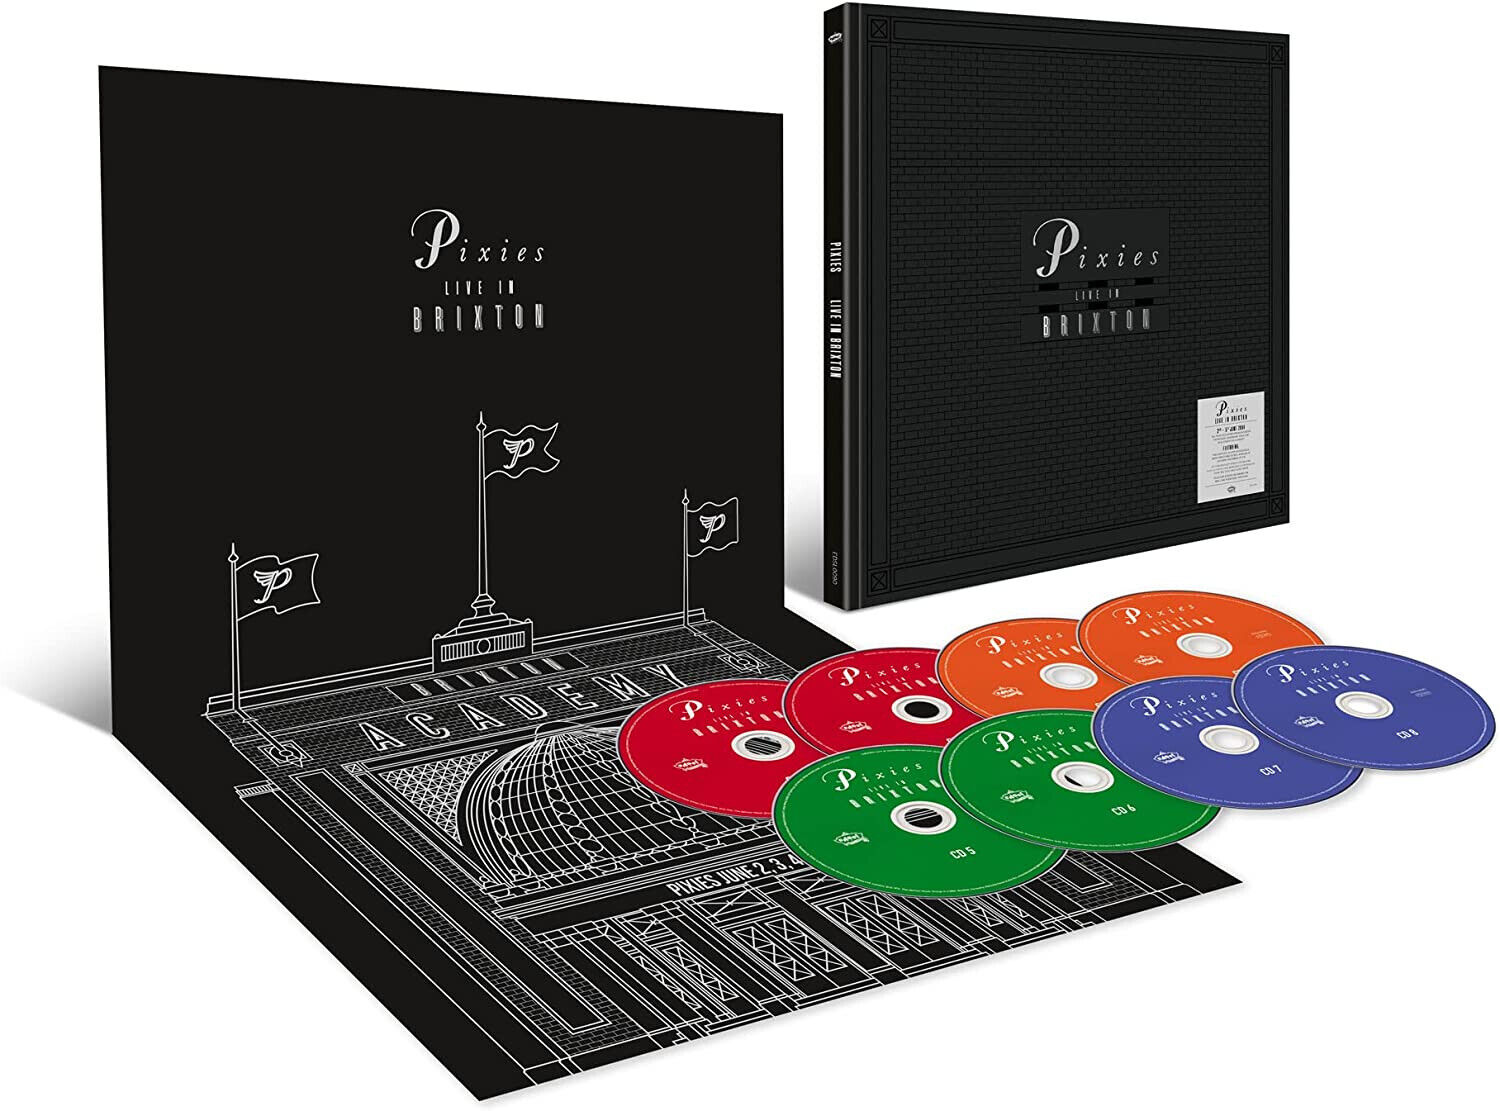 Pixies Live In Brixton 8 CD Deluxe Edition